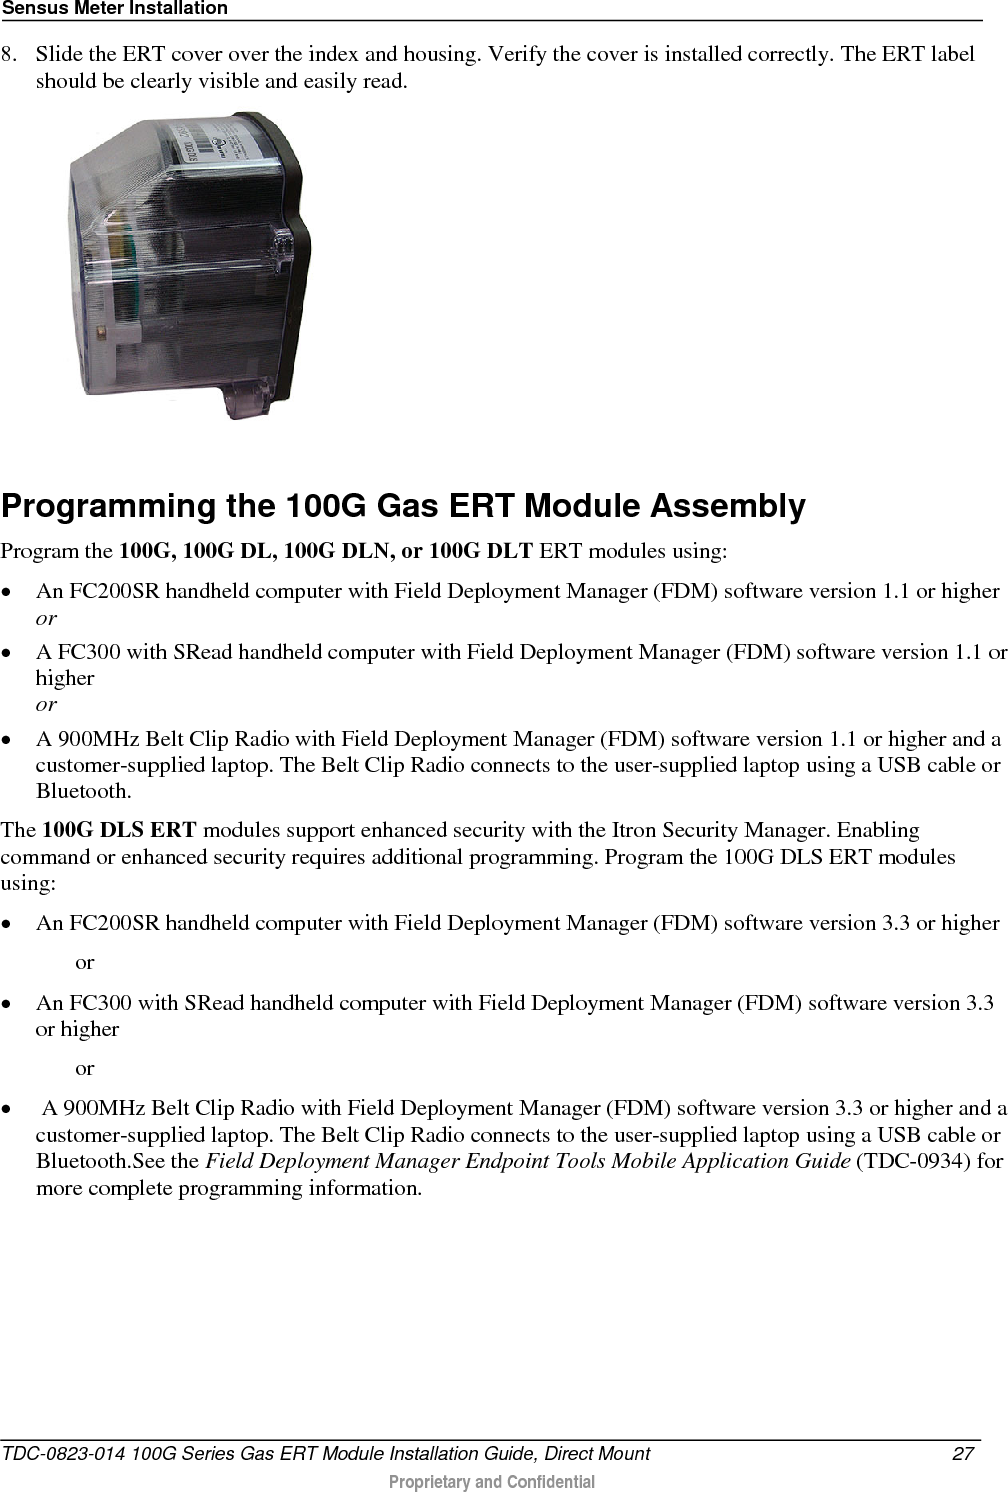 Sensus Meter Installation  8. Slide the ERT cover over the index and housing. Verify the cover is installed correctly. The ERT label should be clearly visible and easily read.   Programming the 100G Gas ERT Module Assembly Program the 100G, 100G DL, 100G DLN, or 100G DLT ERT modules using: • An FC200SR handheld computer with Field Deployment Manager (FDM) software version 1.1 or higher or • A FC300 with SRead handheld computer with Field Deployment Manager (FDM) software version 1.1 or higher or • A 900MHz Belt Clip Radio with Field Deployment Manager (FDM) software version 1.1 or higher and a customer-supplied laptop. The Belt Clip Radio connects to the user-supplied laptop using a USB cable or Bluetooth. The 100G DLS ERT modules support enhanced security with the Itron Security Manager. Enabling command or enhanced security requires additional programming. Program the 100G DLS ERT modules using: • An FC200SR handheld computer with Field Deployment Manager (FDM) software version 3.3 or higher   or • An FC300 with SRead handheld computer with Field Deployment Manager (FDM) software version 3.3 or higher   or •  A 900MHz Belt Clip Radio with Field Deployment Manager (FDM) software version 3.3 or higher and a customer-supplied laptop. The Belt Clip Radio connects to the user-supplied laptop using a USB cable or Bluetooth.See the Field Deployment Manager Endpoint Tools Mobile Application Guide (TDC-0934) for more complete programming information. TDC-0823-014 100G Series Gas ERT Module Installation Guide, Direct Mount 27   Proprietary and Confidential  